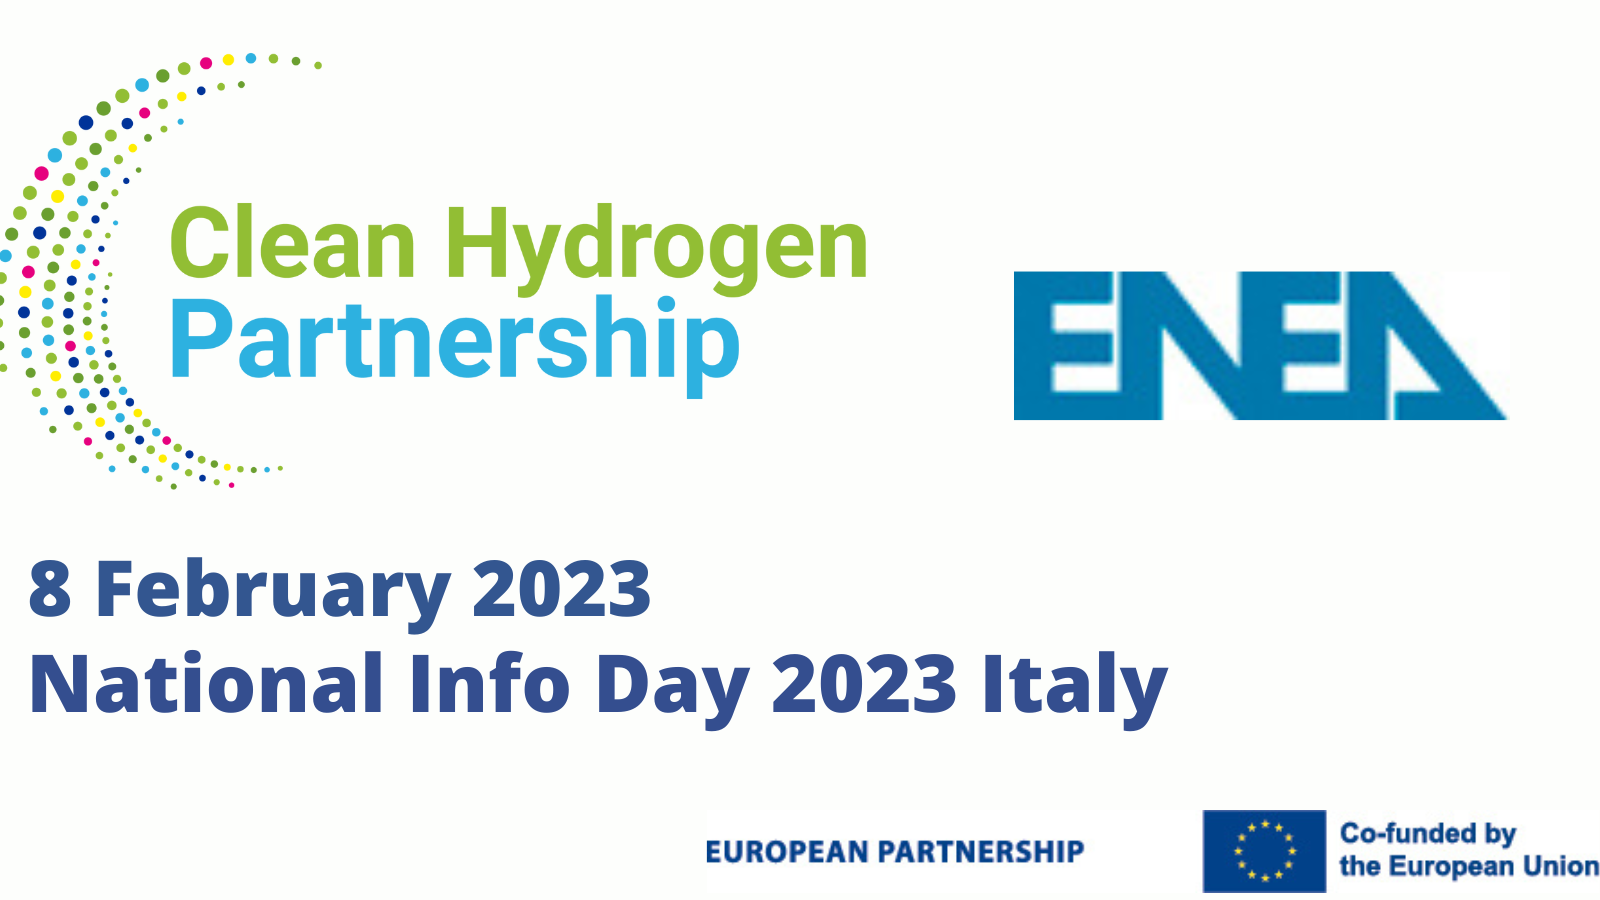 Italy 2023 Info Day